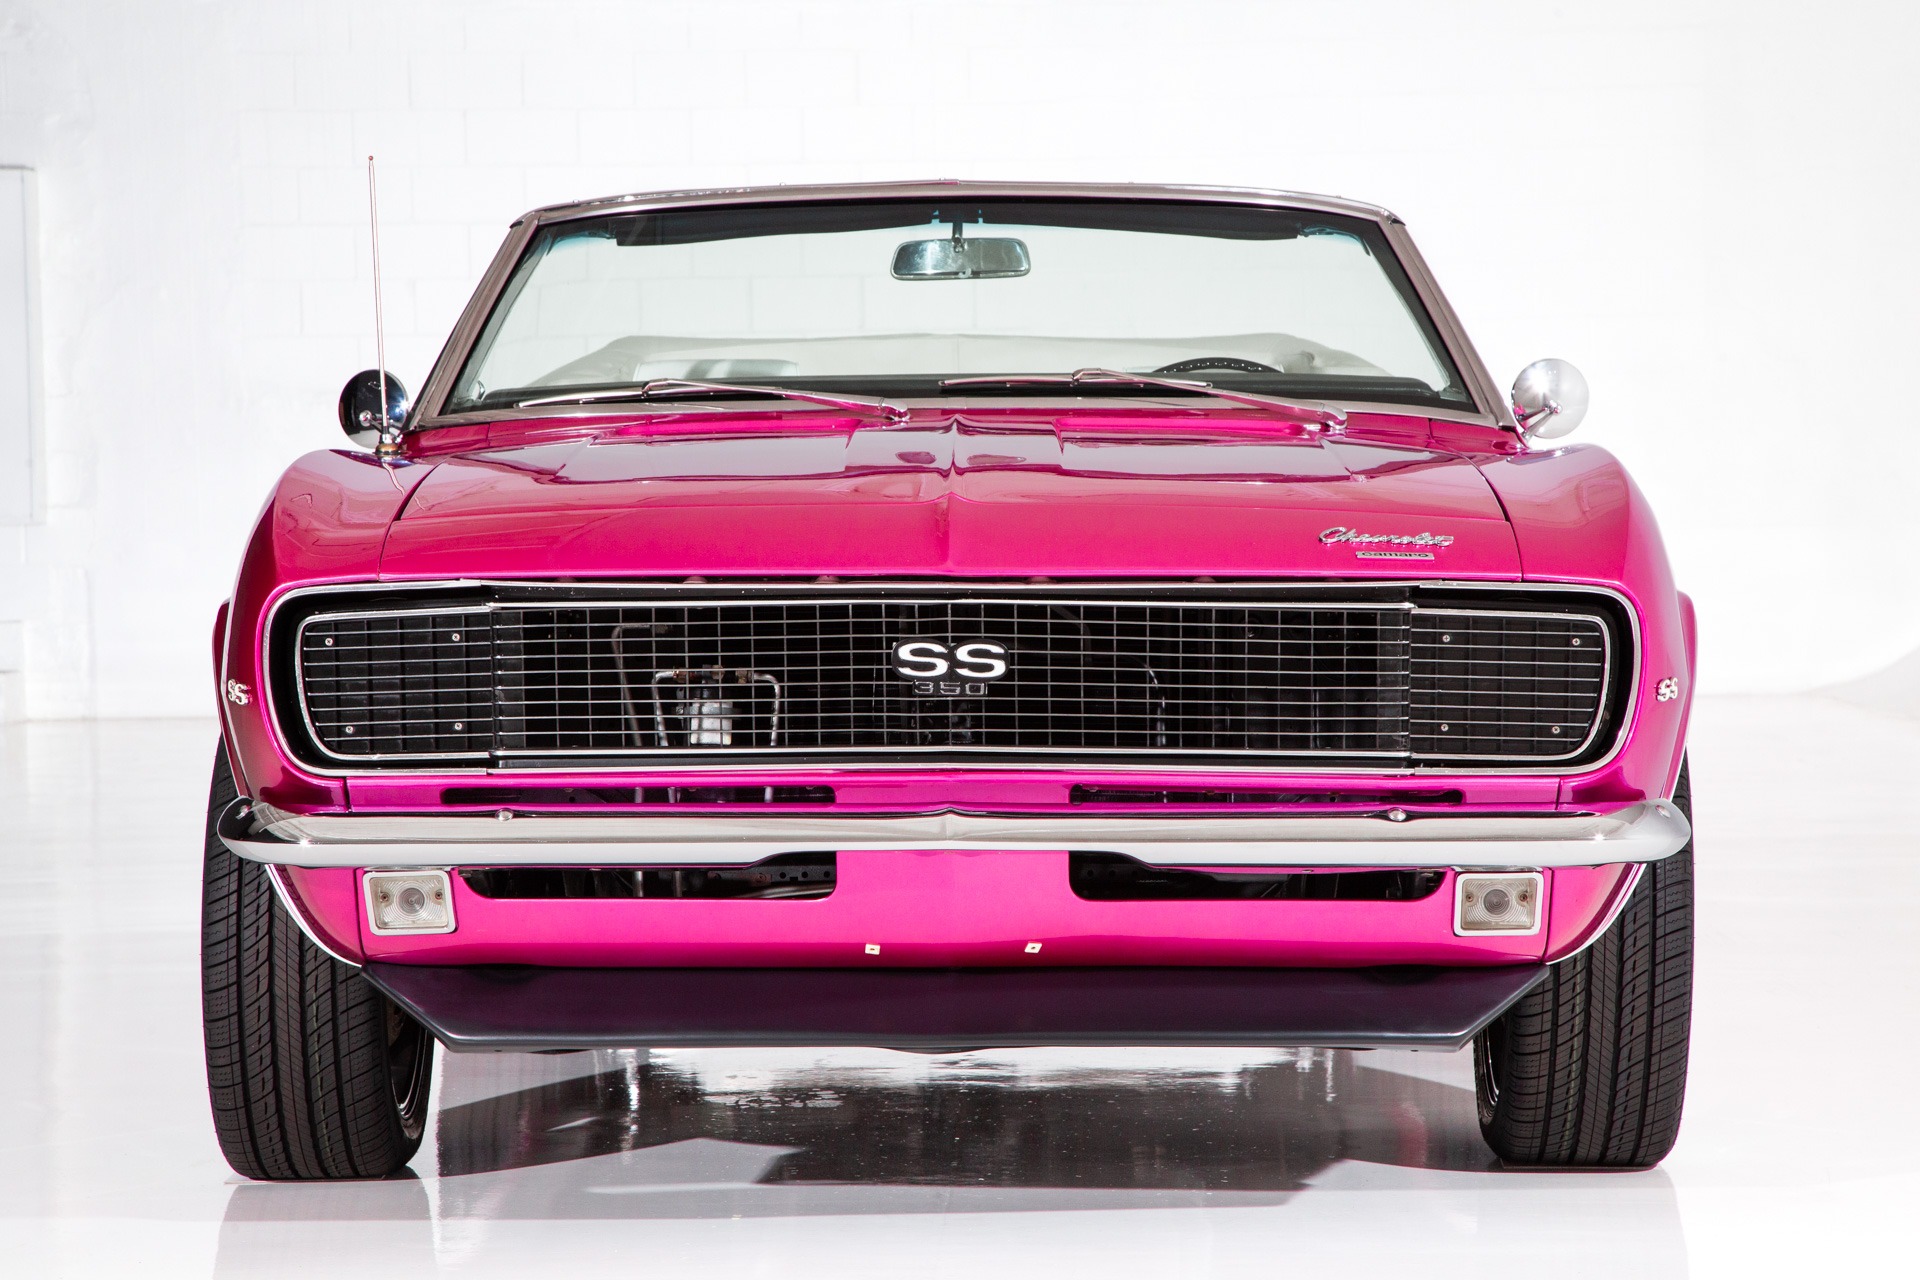 For Sale Used 1967 Chevrolet Camaro Real RS/SS Code 3L/4P 4-Spd AC | American Dream Machines Des Moines IA 50309